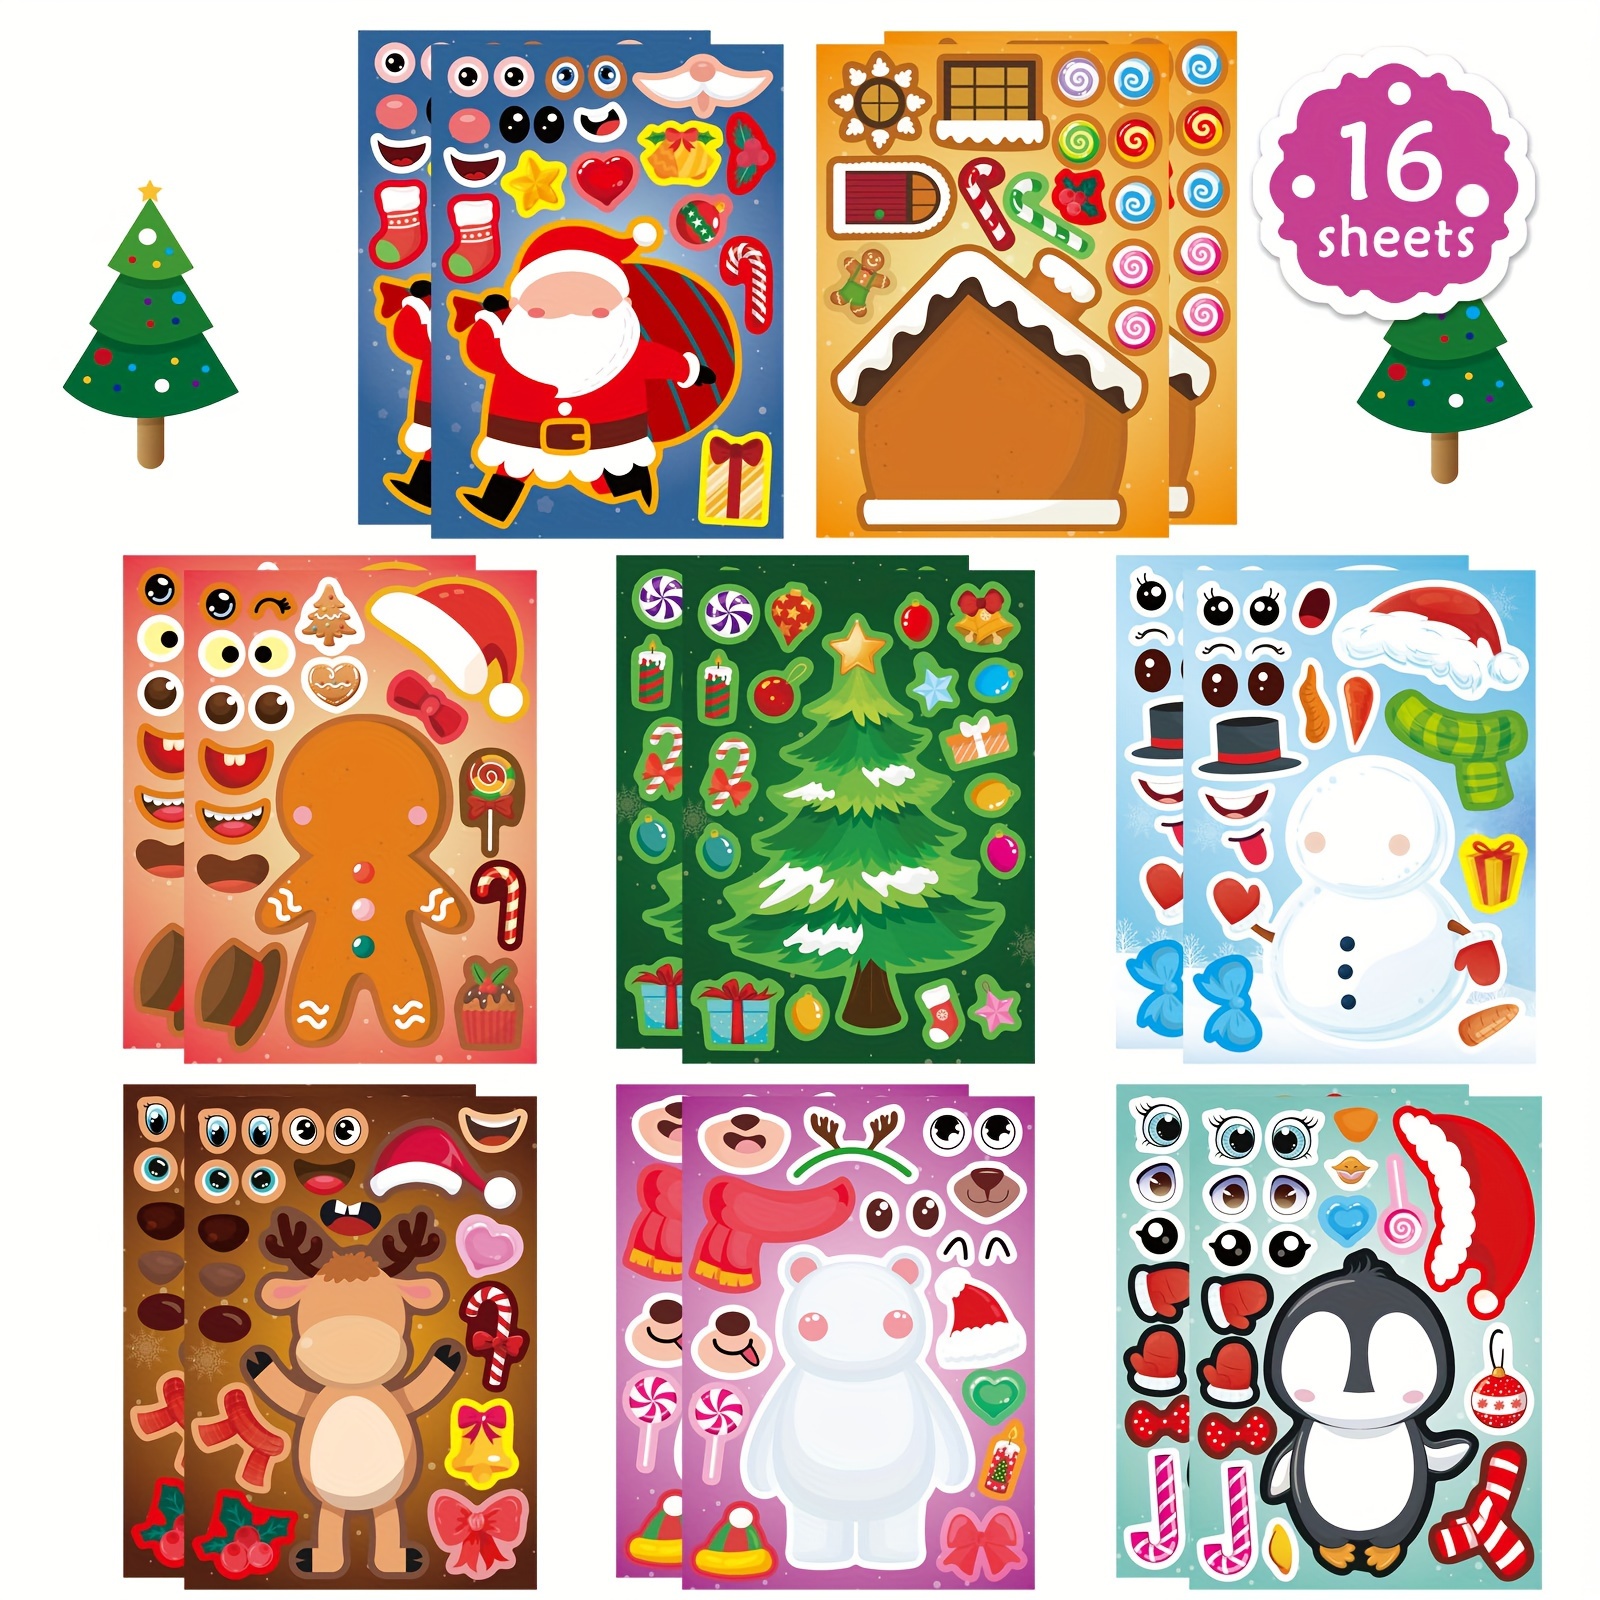 

16 Sheets Christmas Stickers, Make Your Own Characters Mix And Match Stickers With Full Body Design, Christmas Gift Stickers For Craft